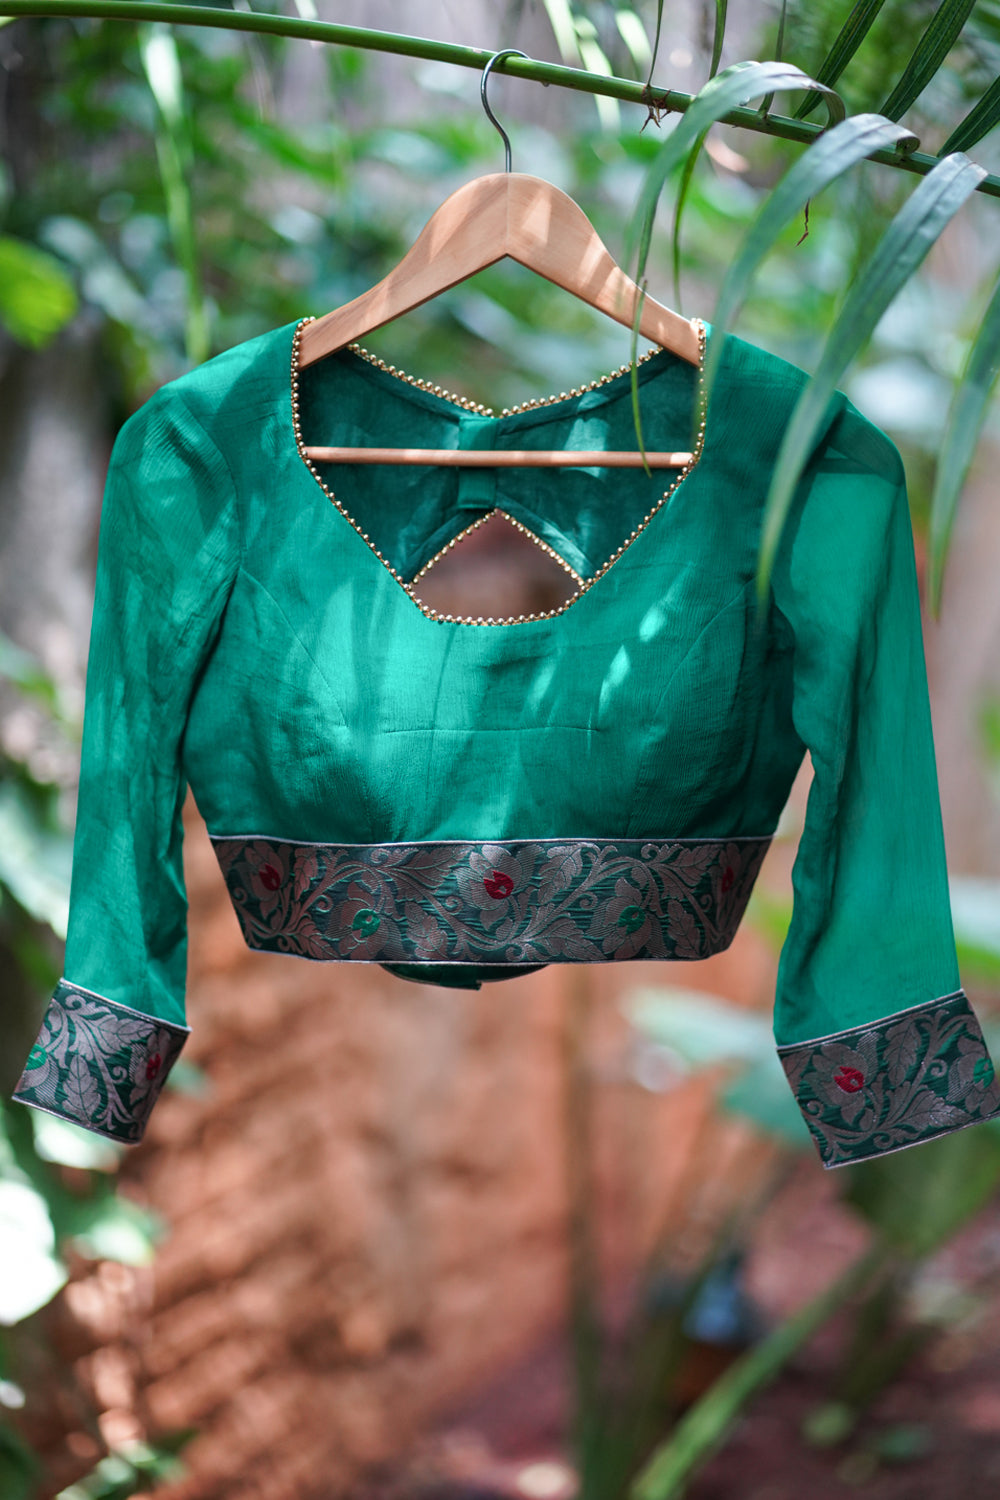 Green  chiffon blouse with brocade detailing and sheer sleeves